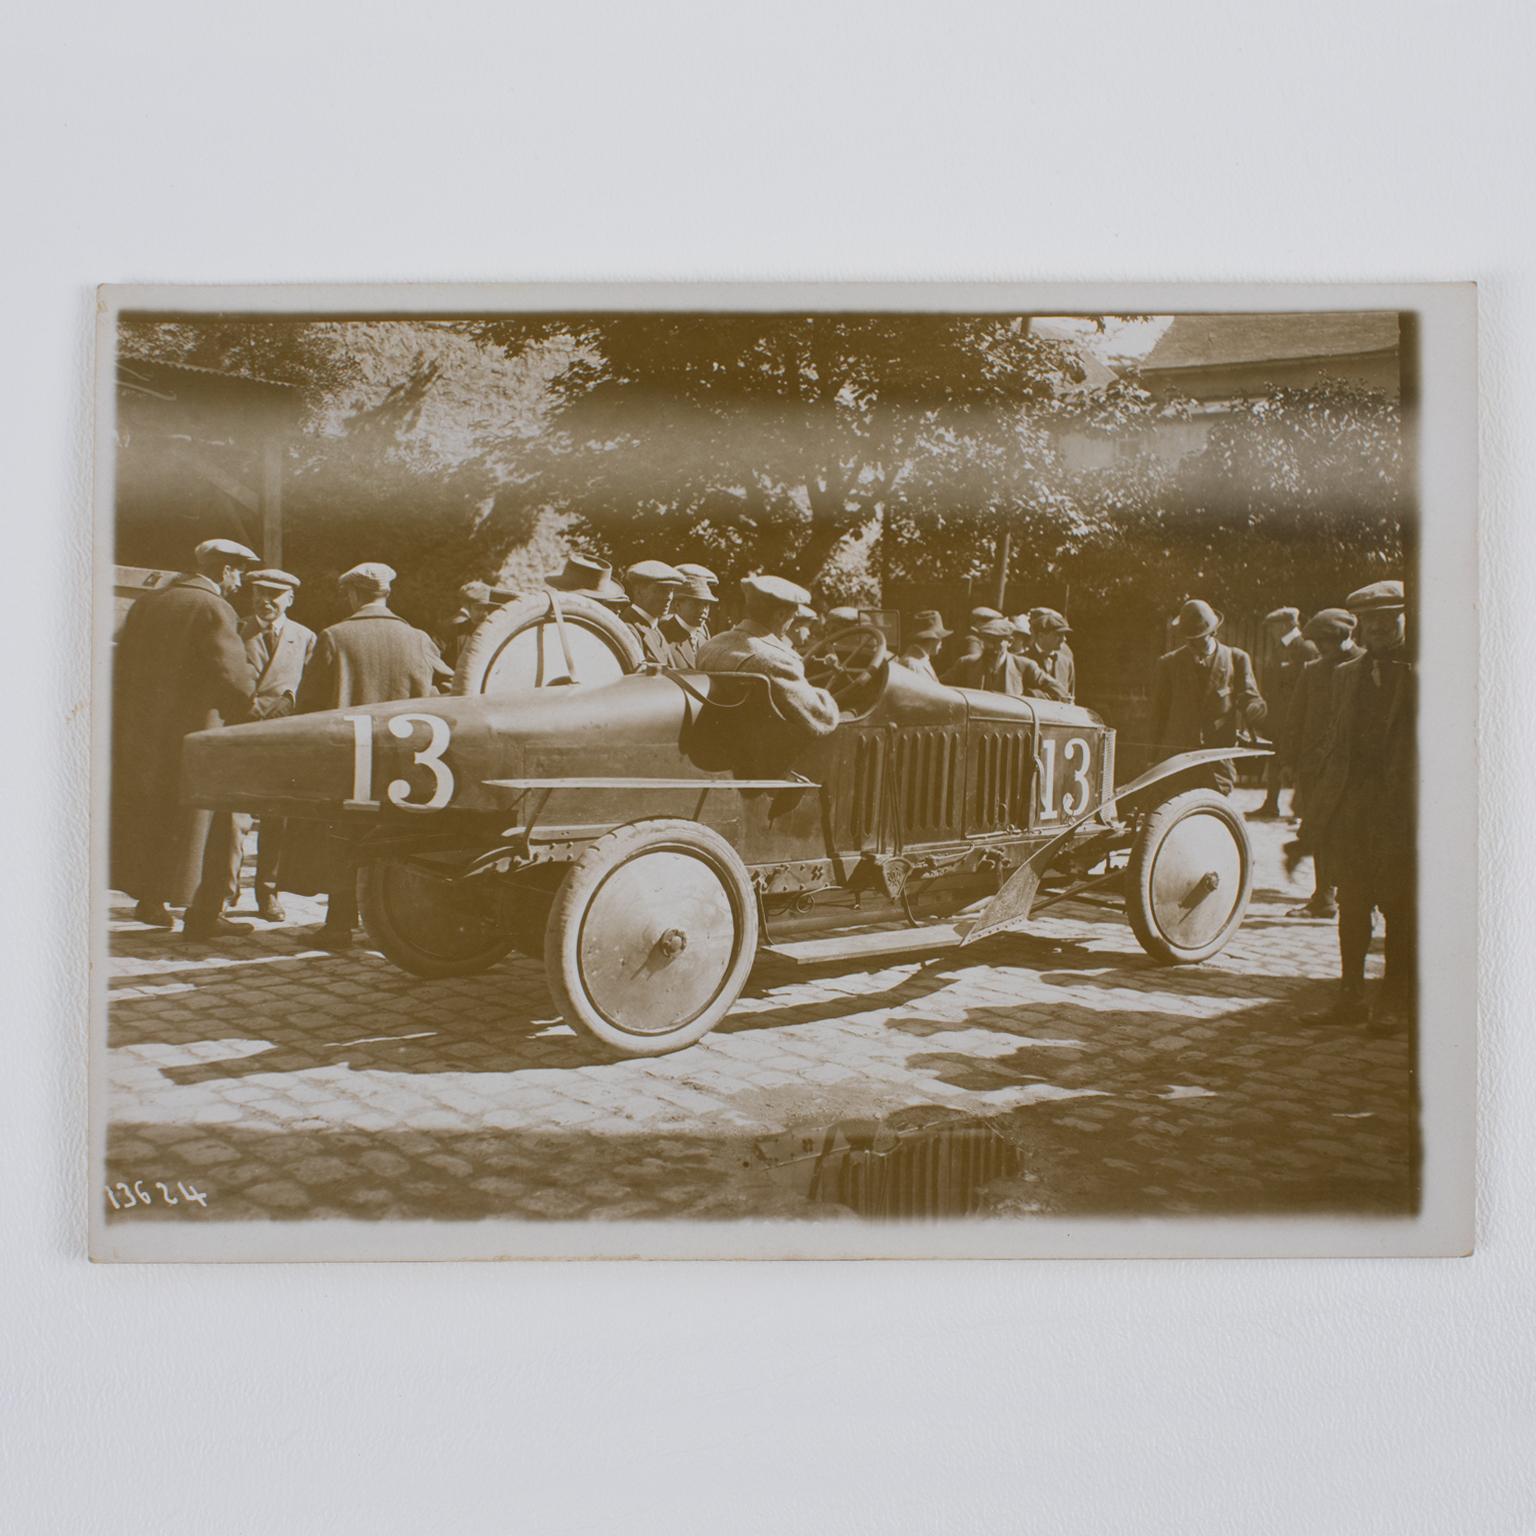 Car Race in France, 1911 - Silver Gelatin Black and White Photography, Framed 5